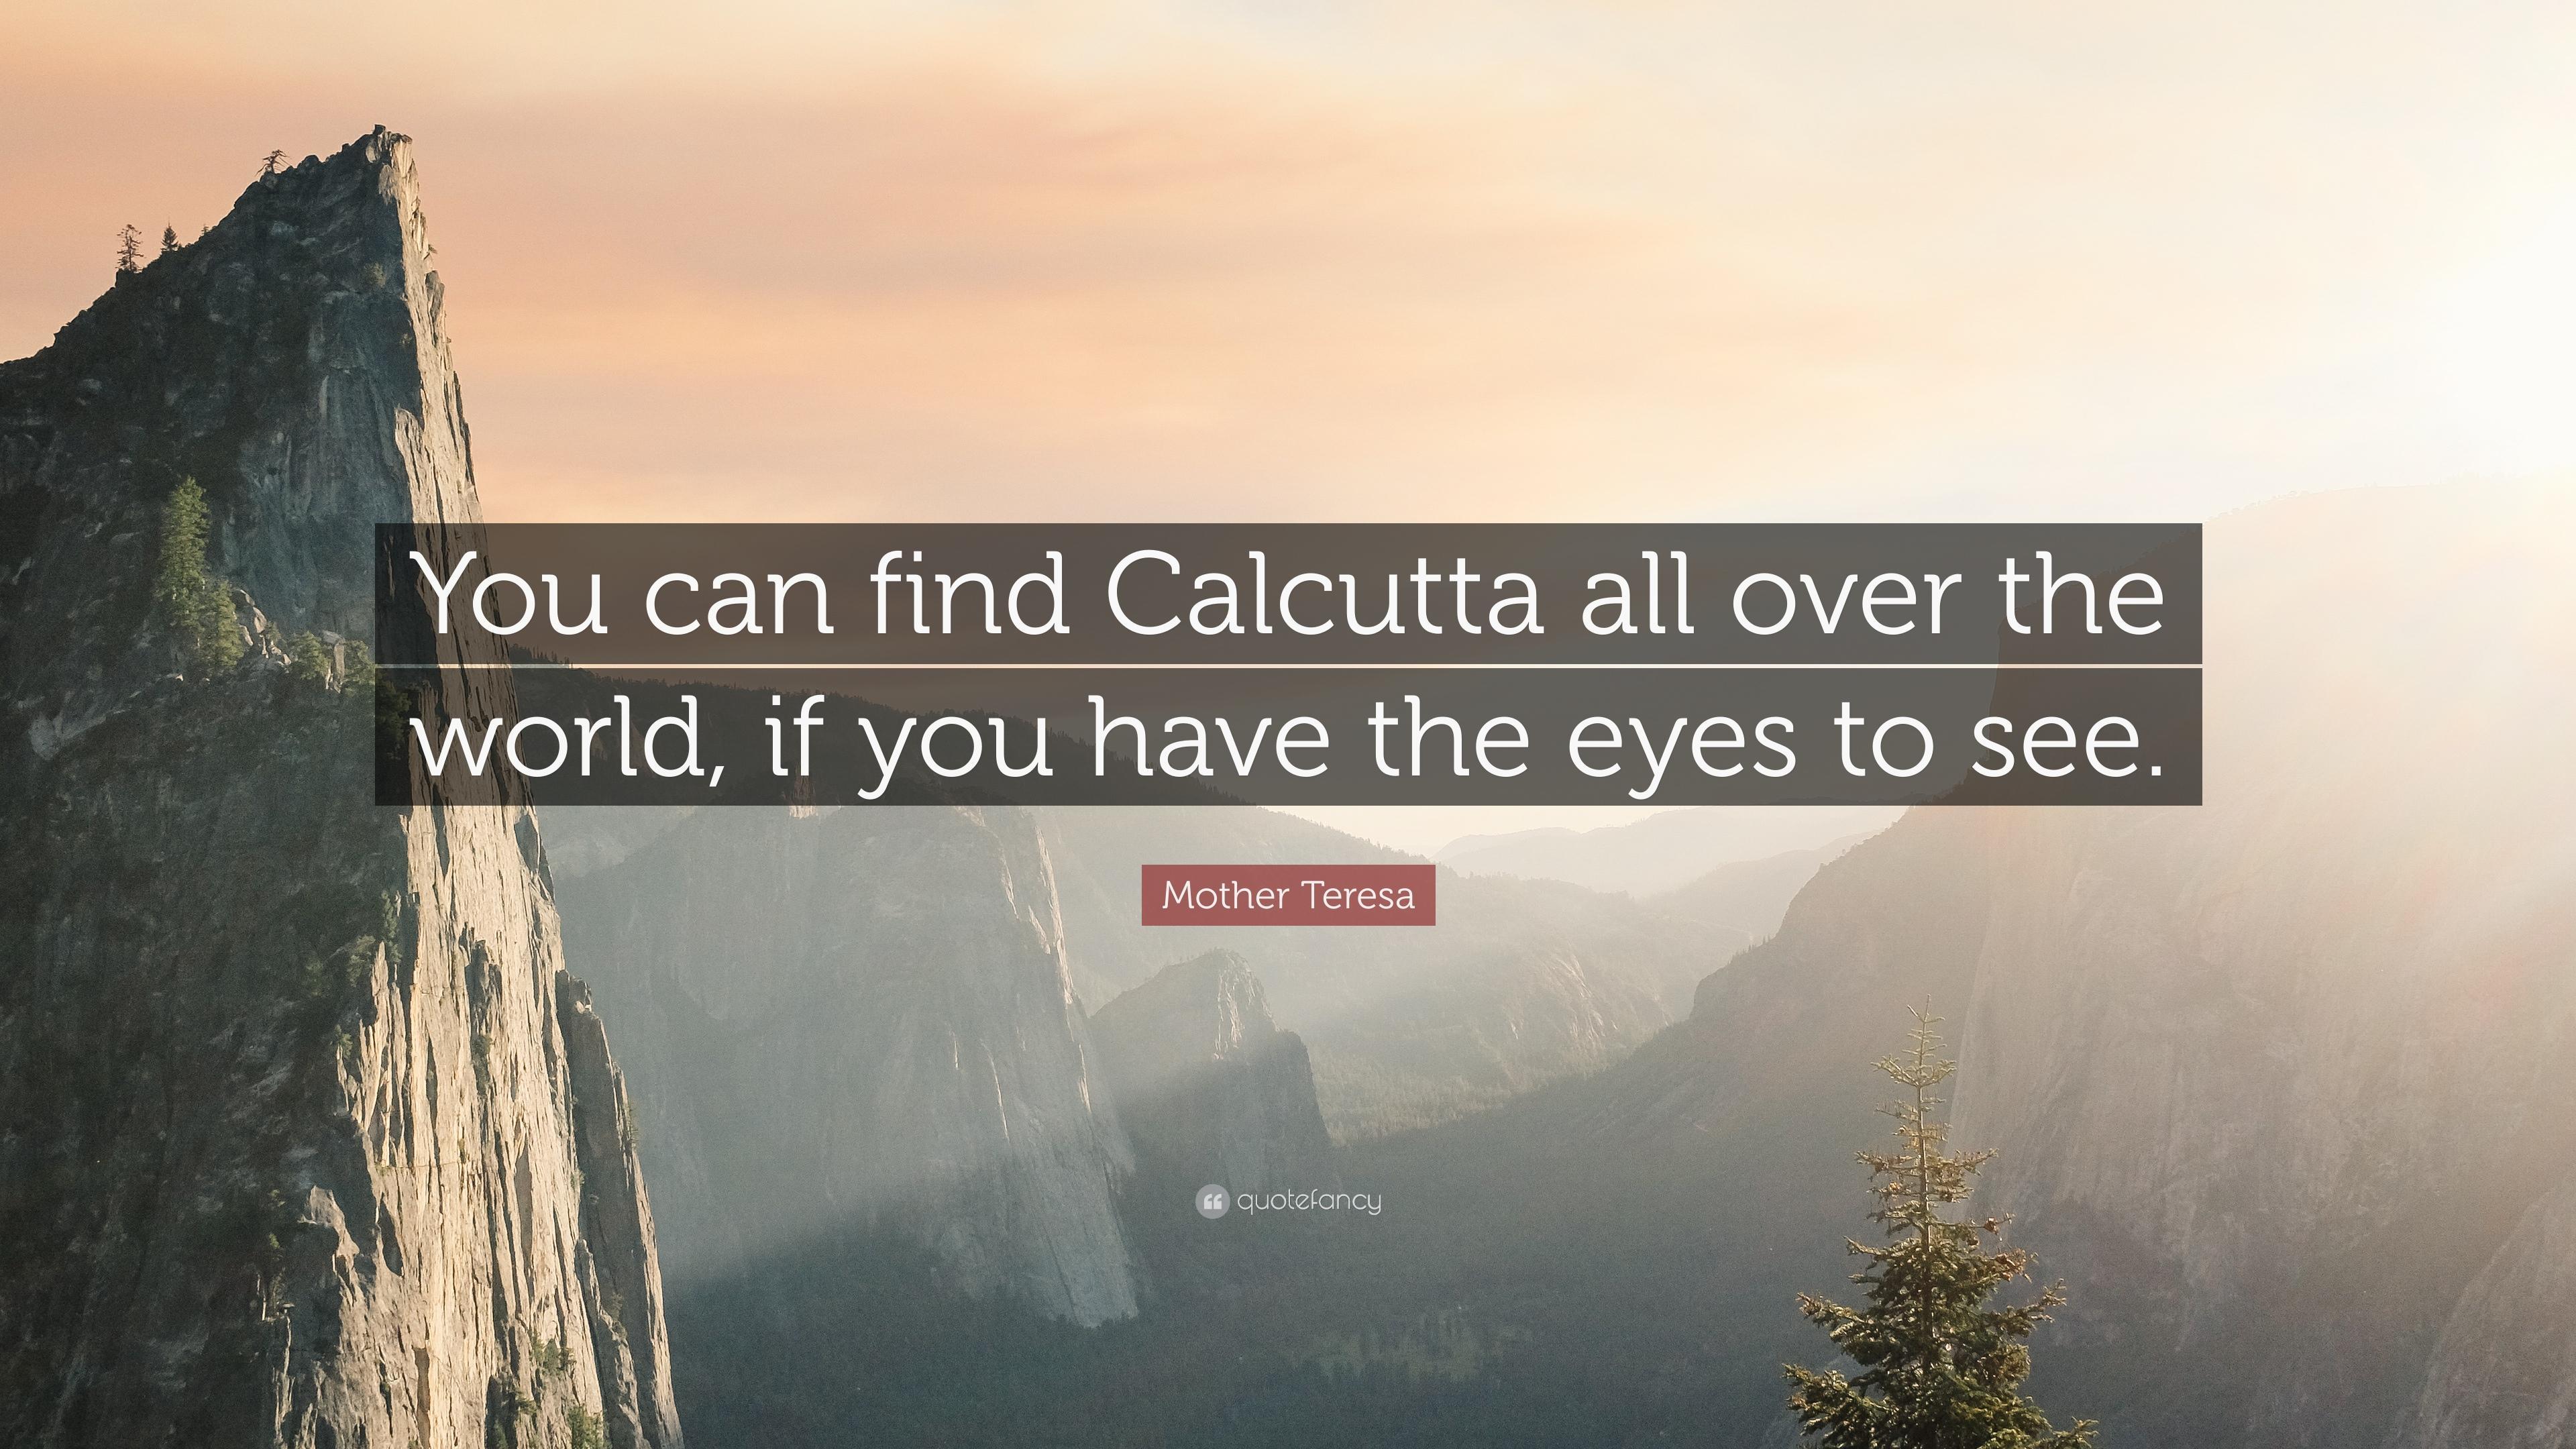 Mother Teresa Quote: “You can find Calcutta all over the world, if